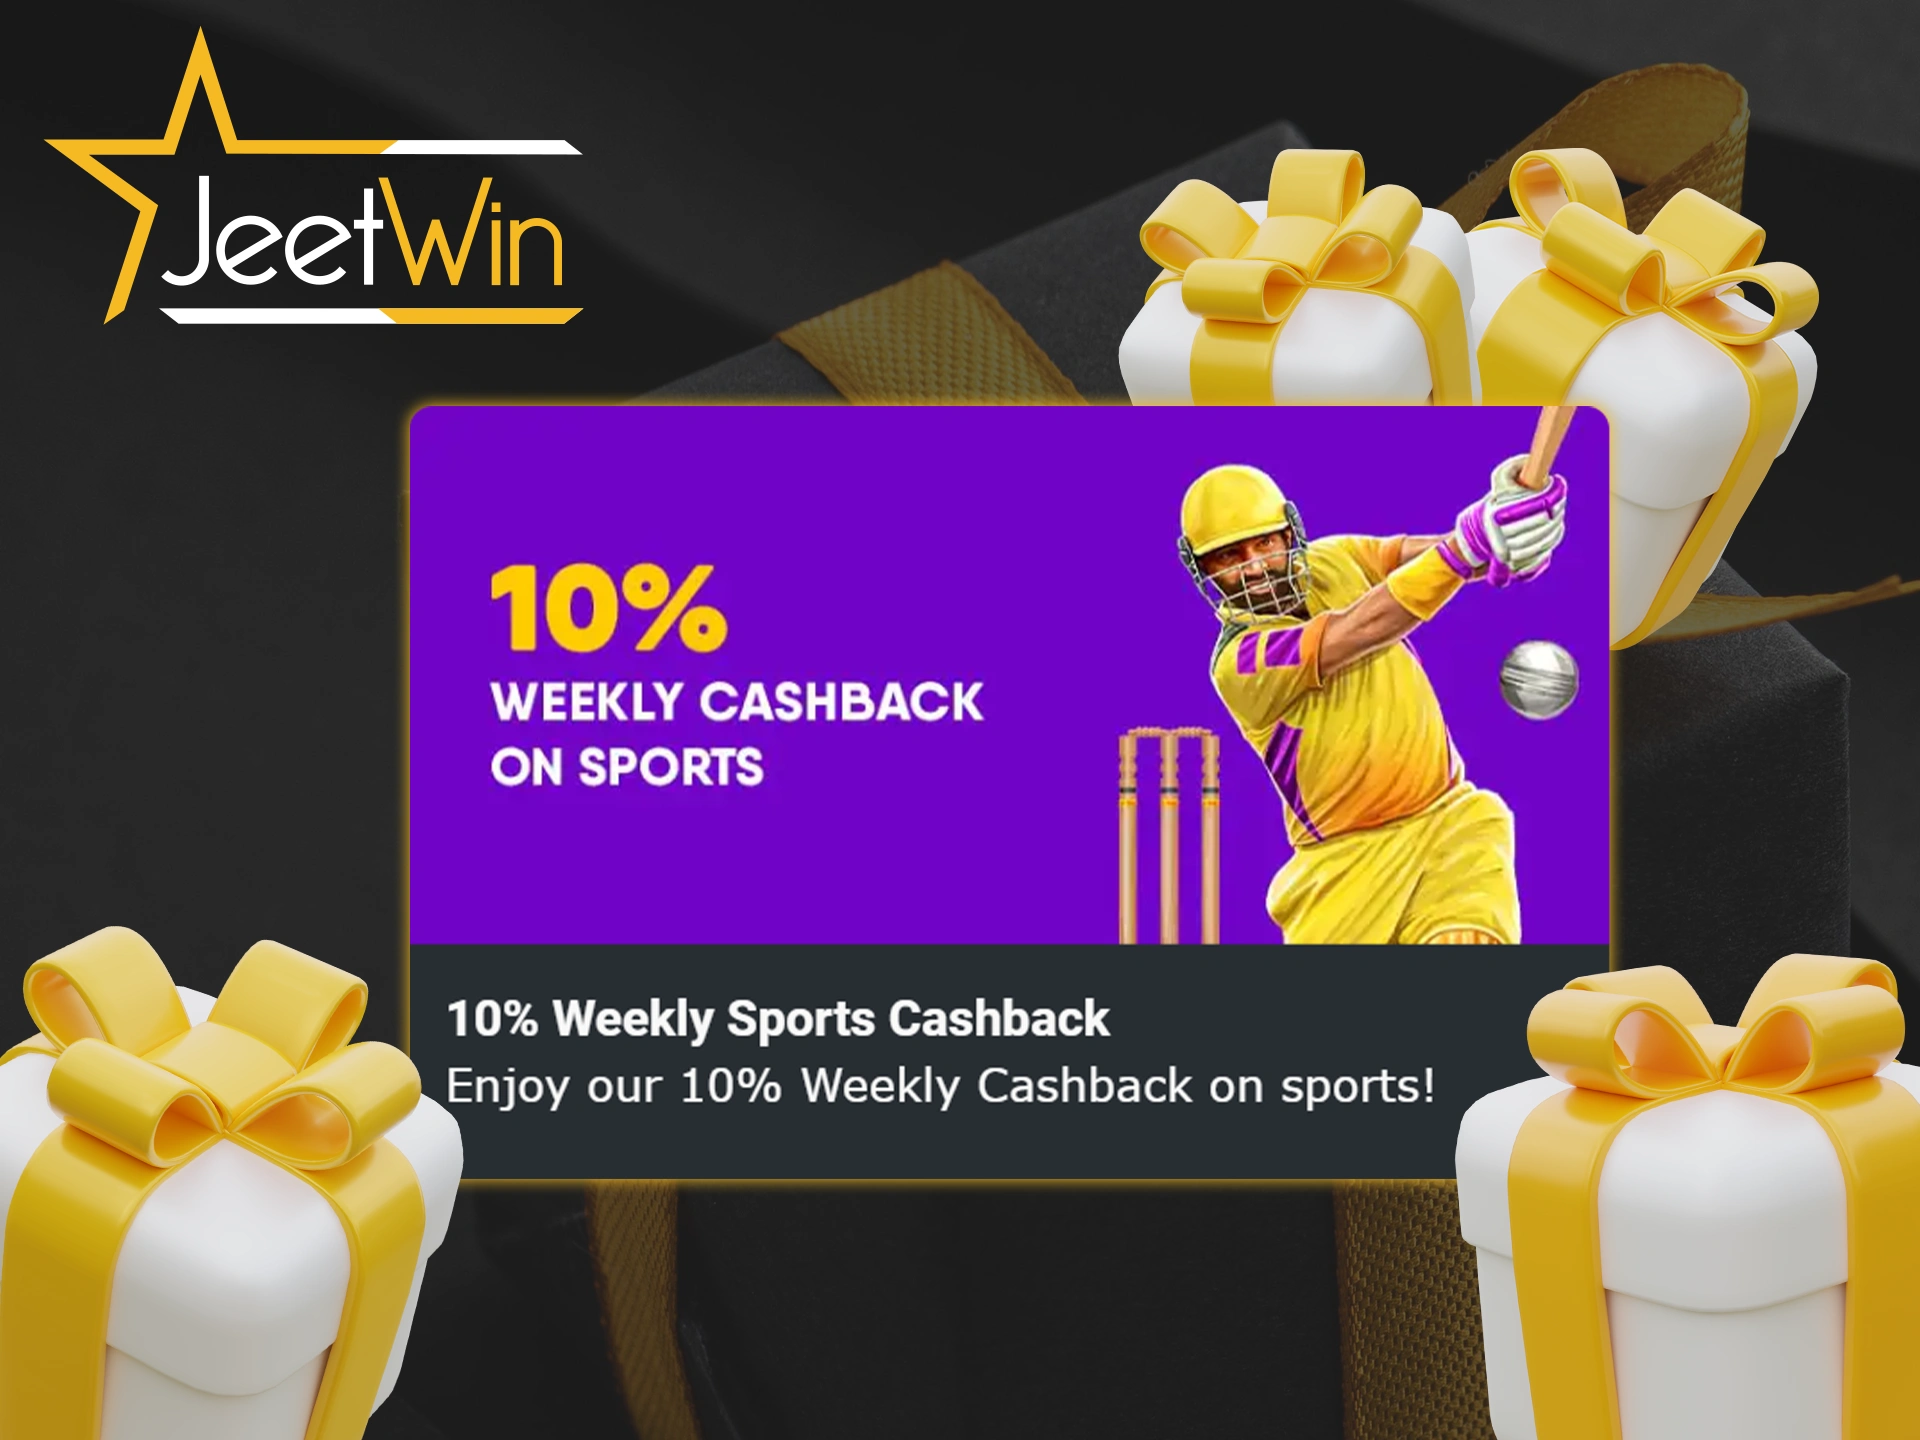 Get weekly cashback on football betting at Jeetwin.